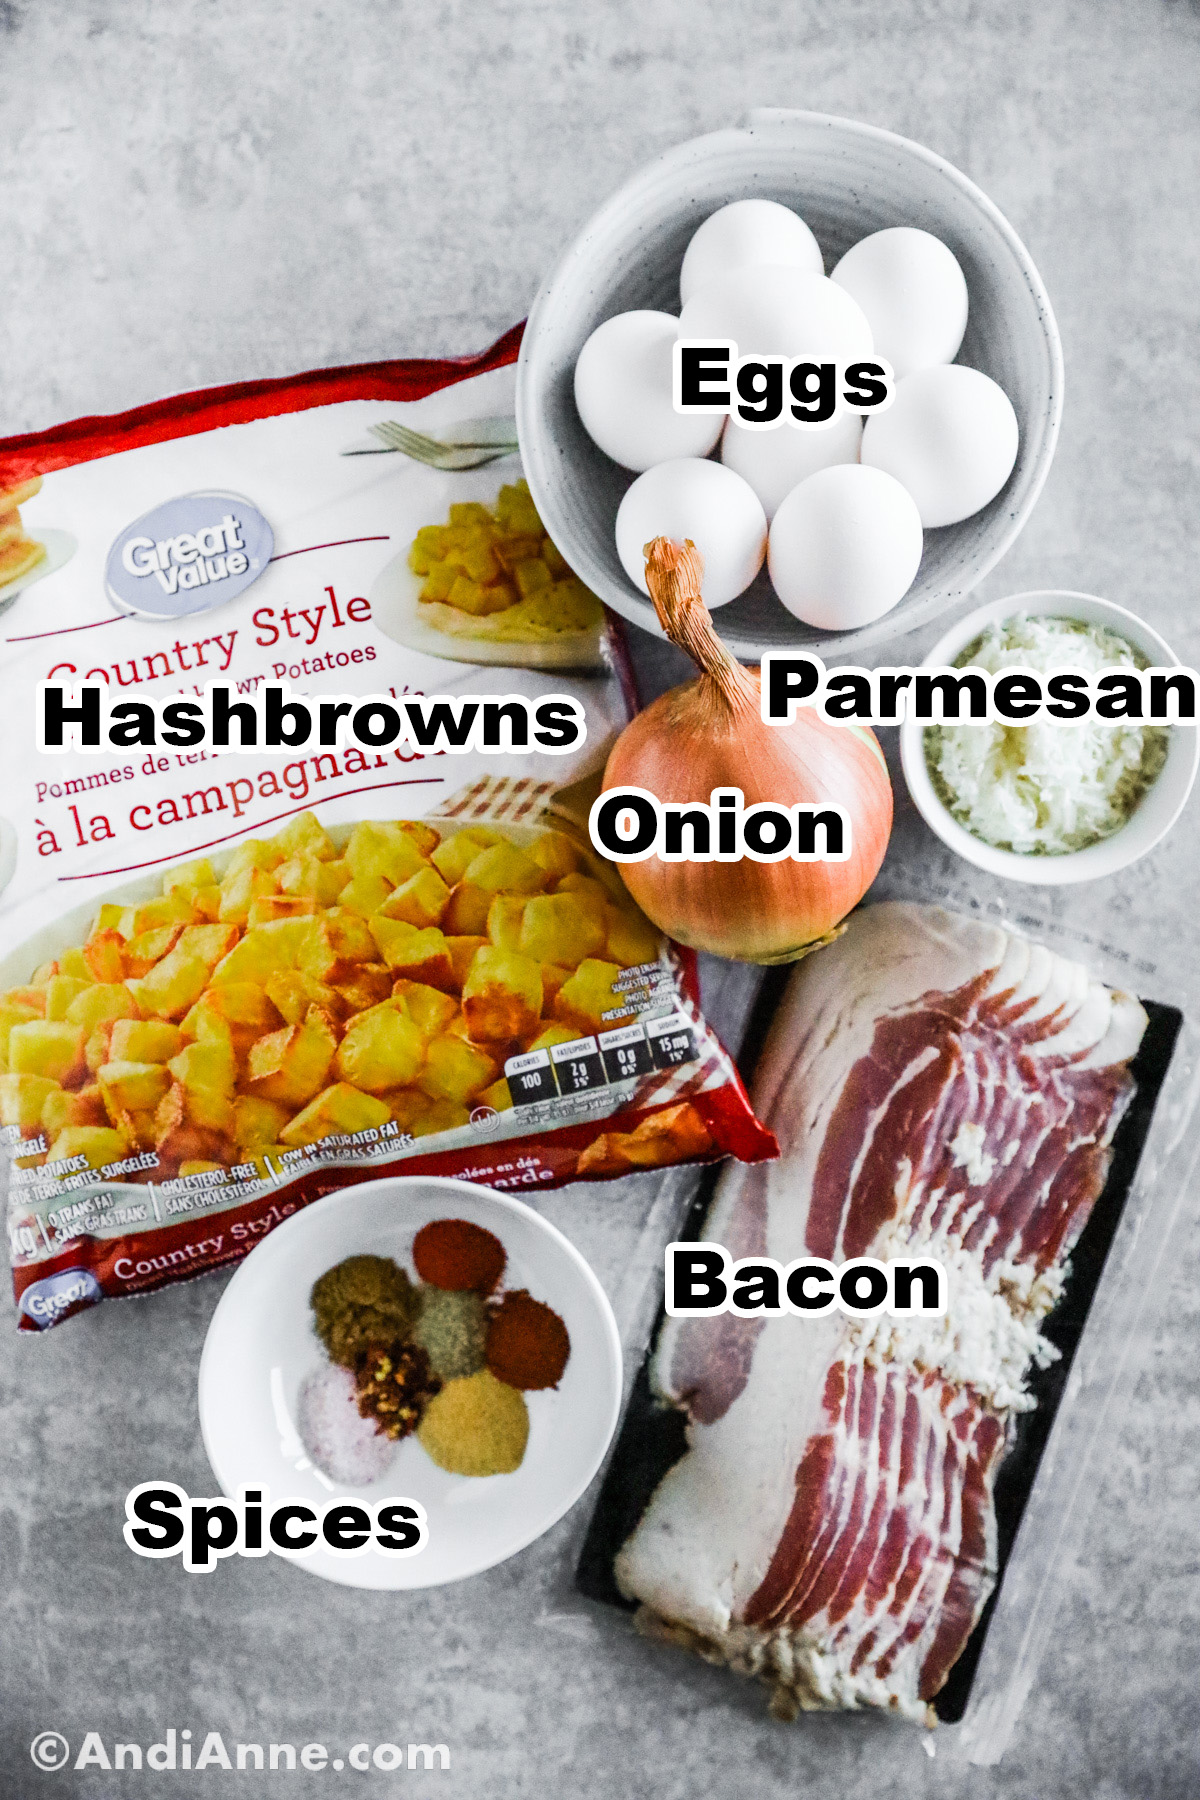 Recipe ingredients on including a bag of hash browns, bowls of eggs and grated parmesan, an onion, raw bacon and bowl of spices.